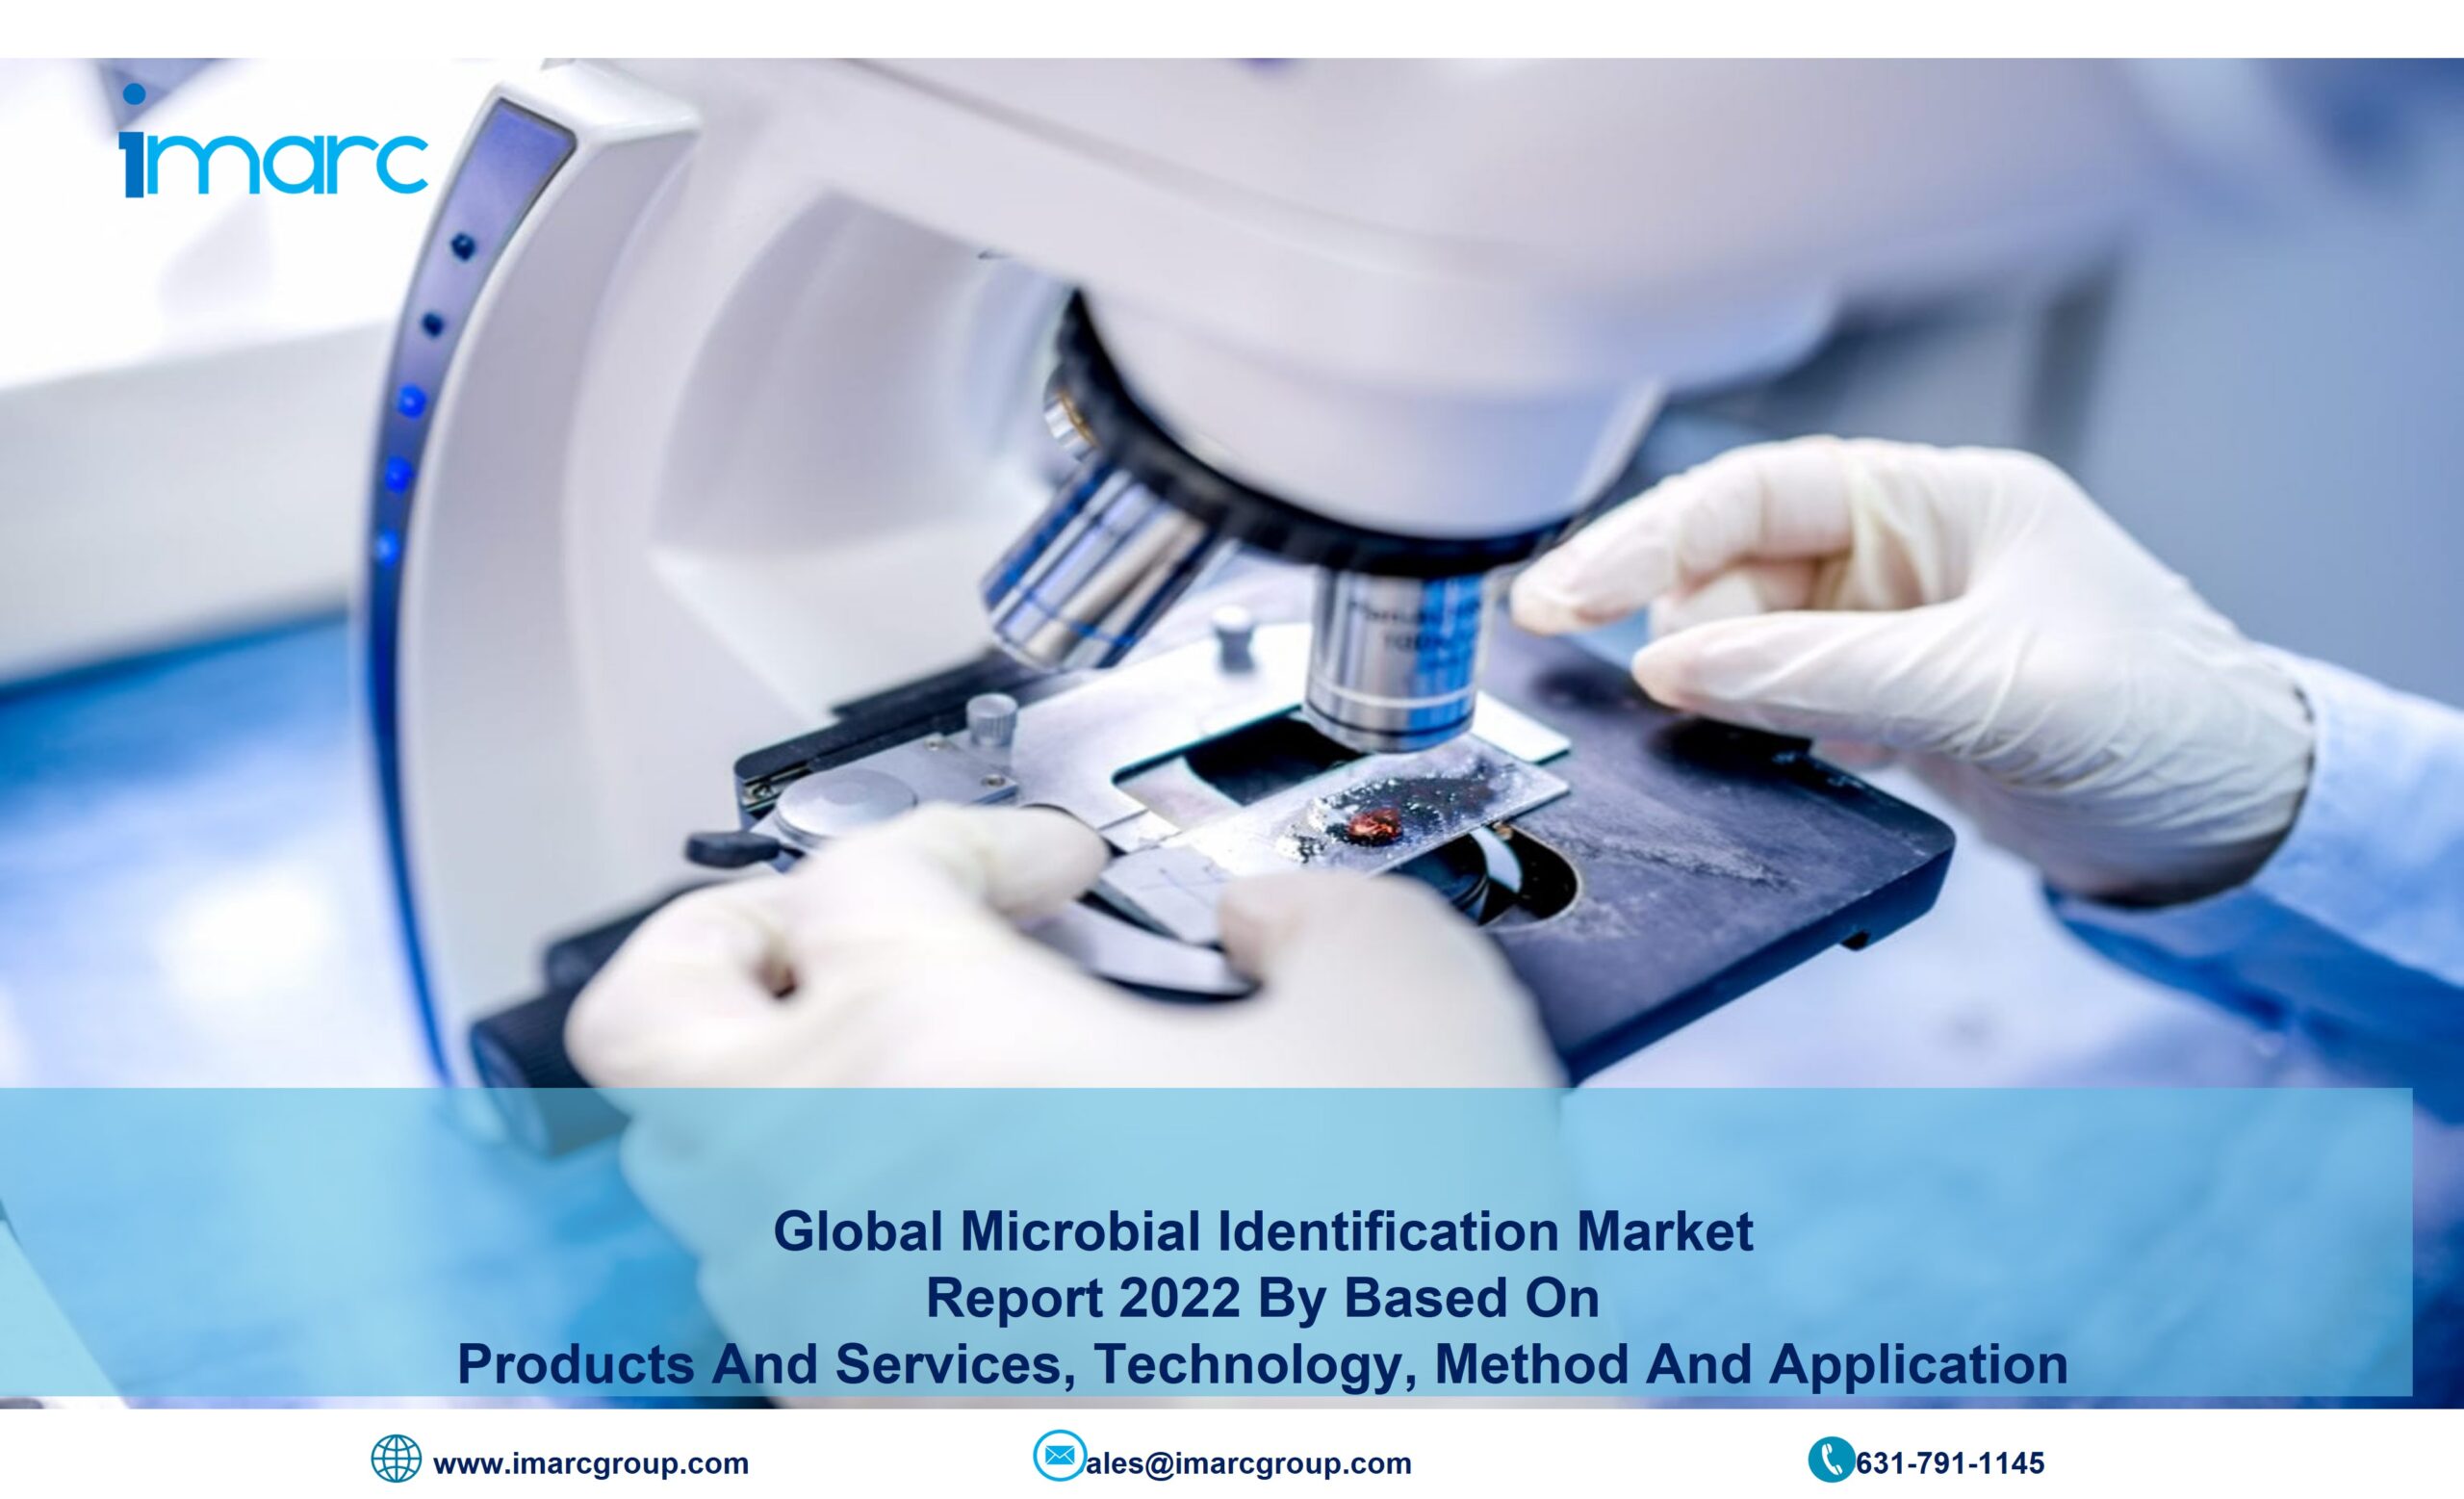 Microbial Identification Market to Reach US$ 7.32 Billion by 2027 | IMARC Group 1